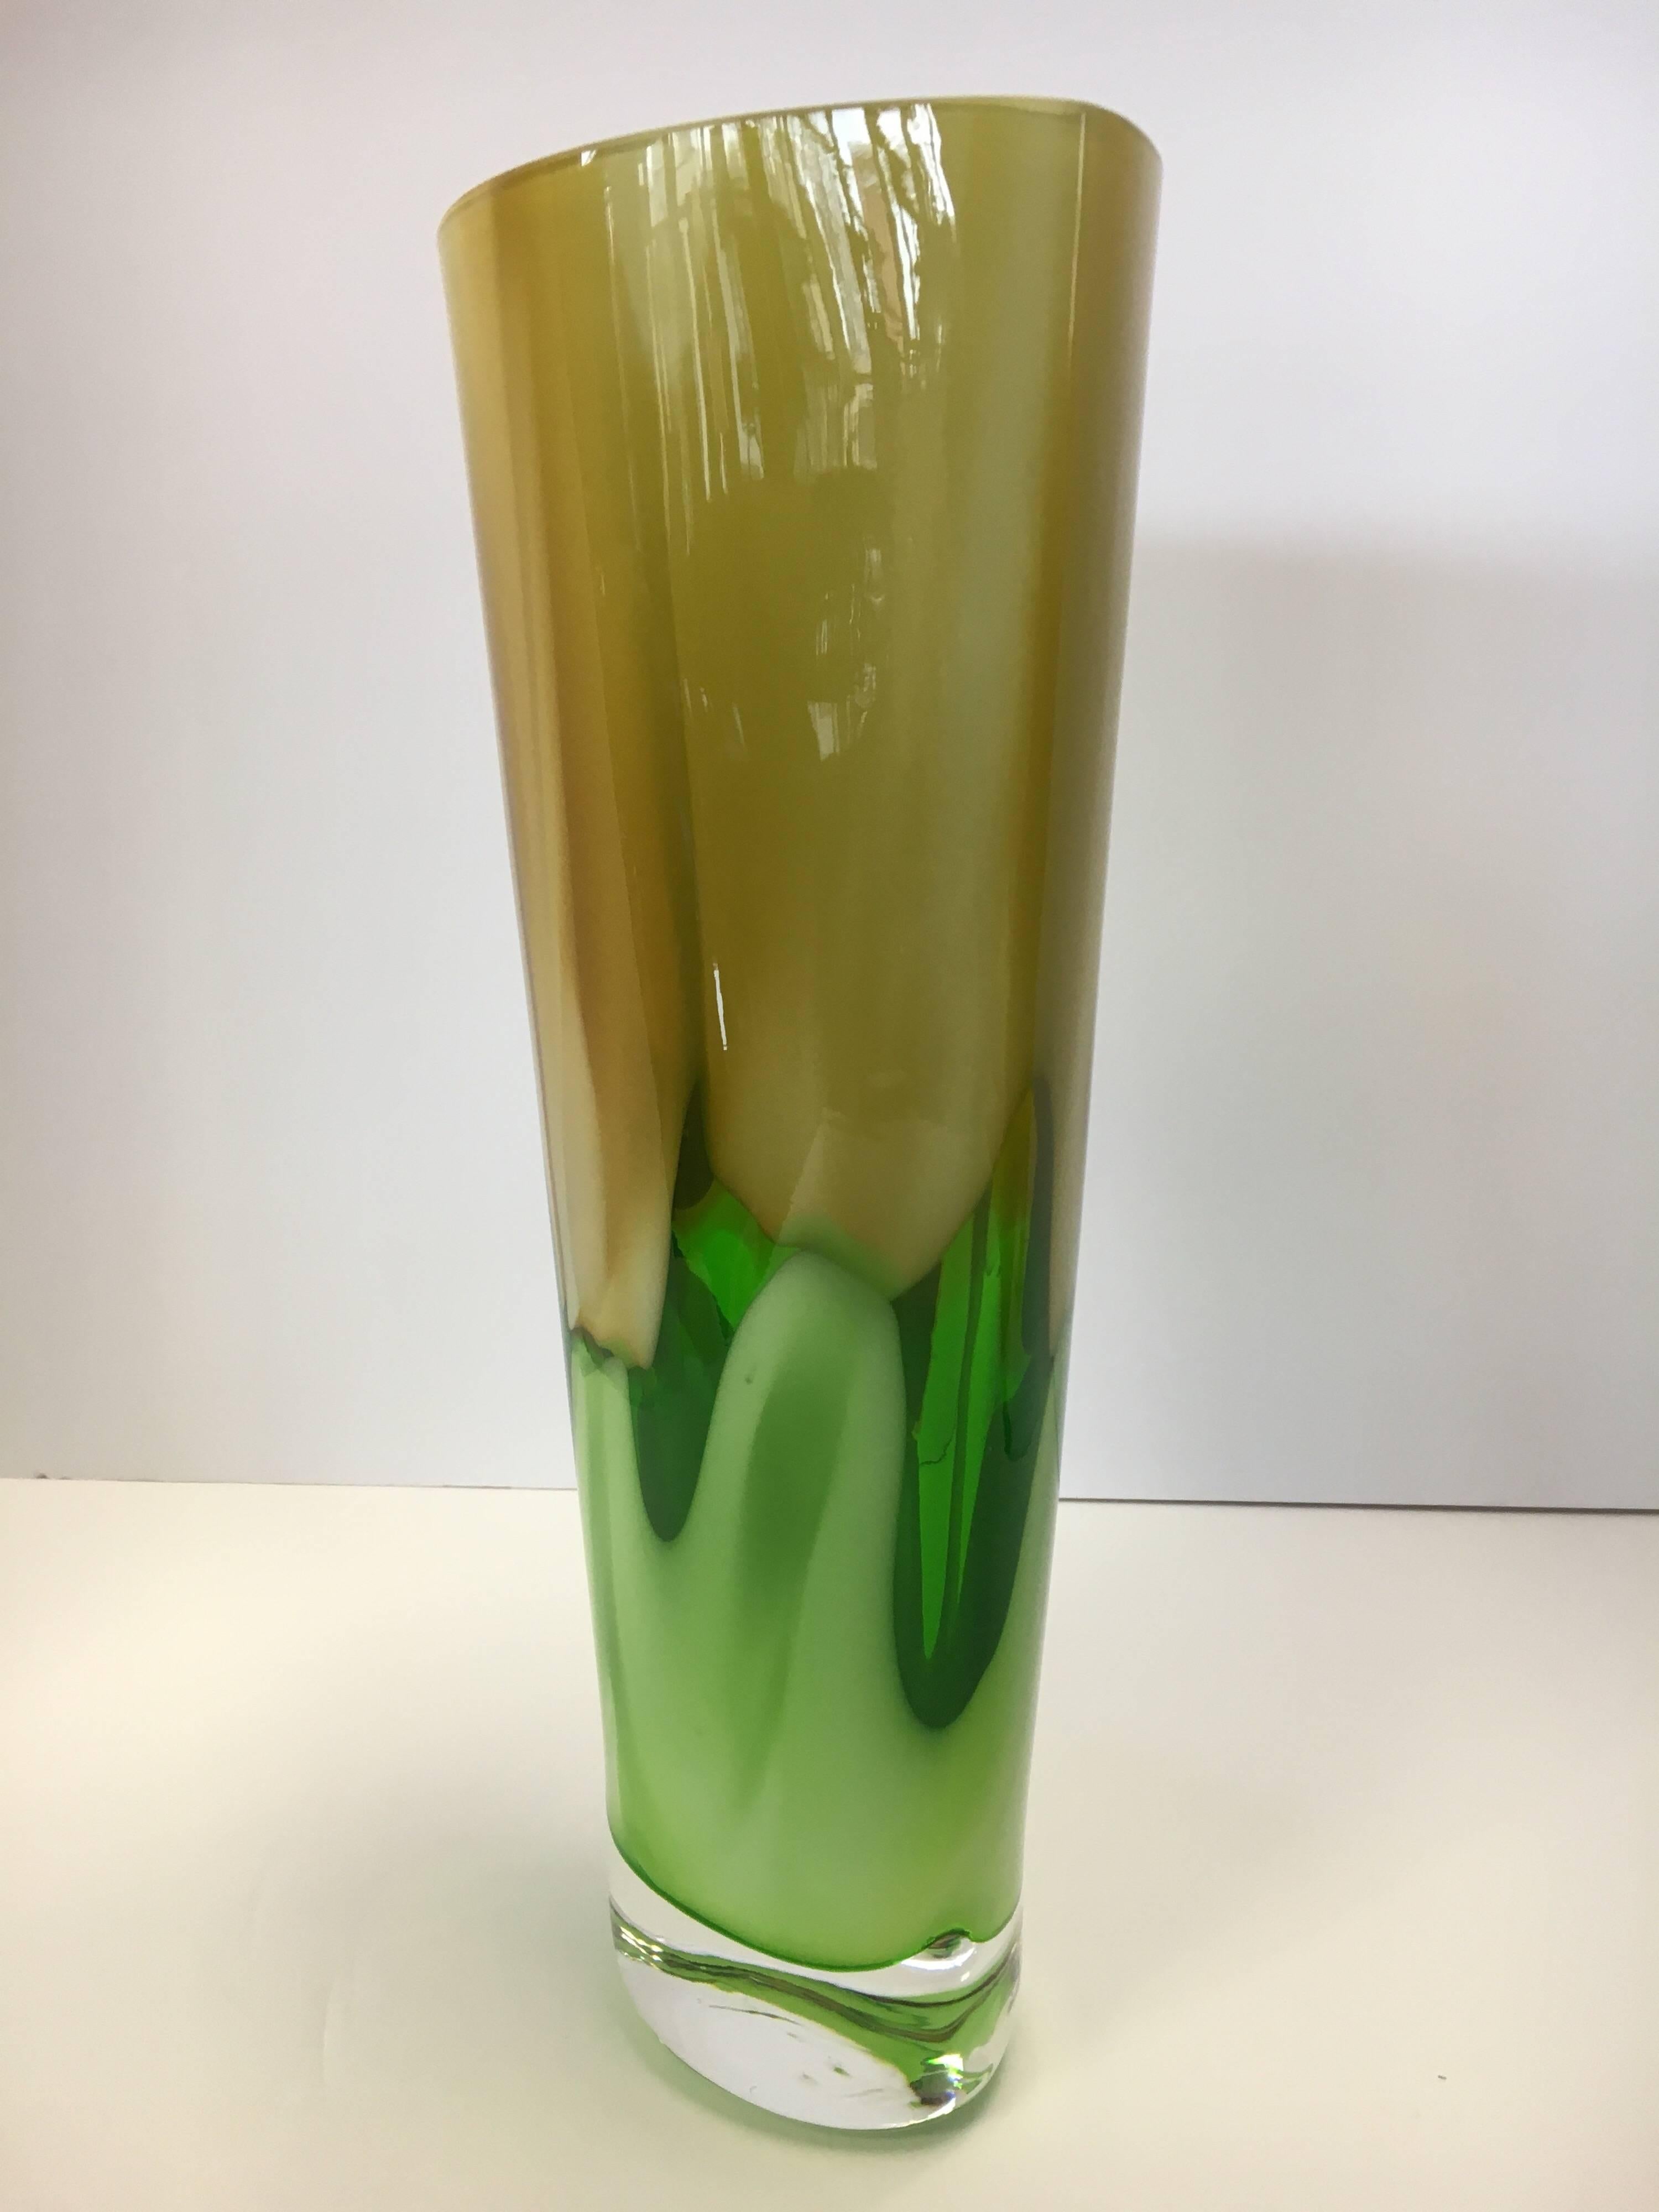 Stunning signed Waterford Evolution sculptural vase with mod colors throughout.